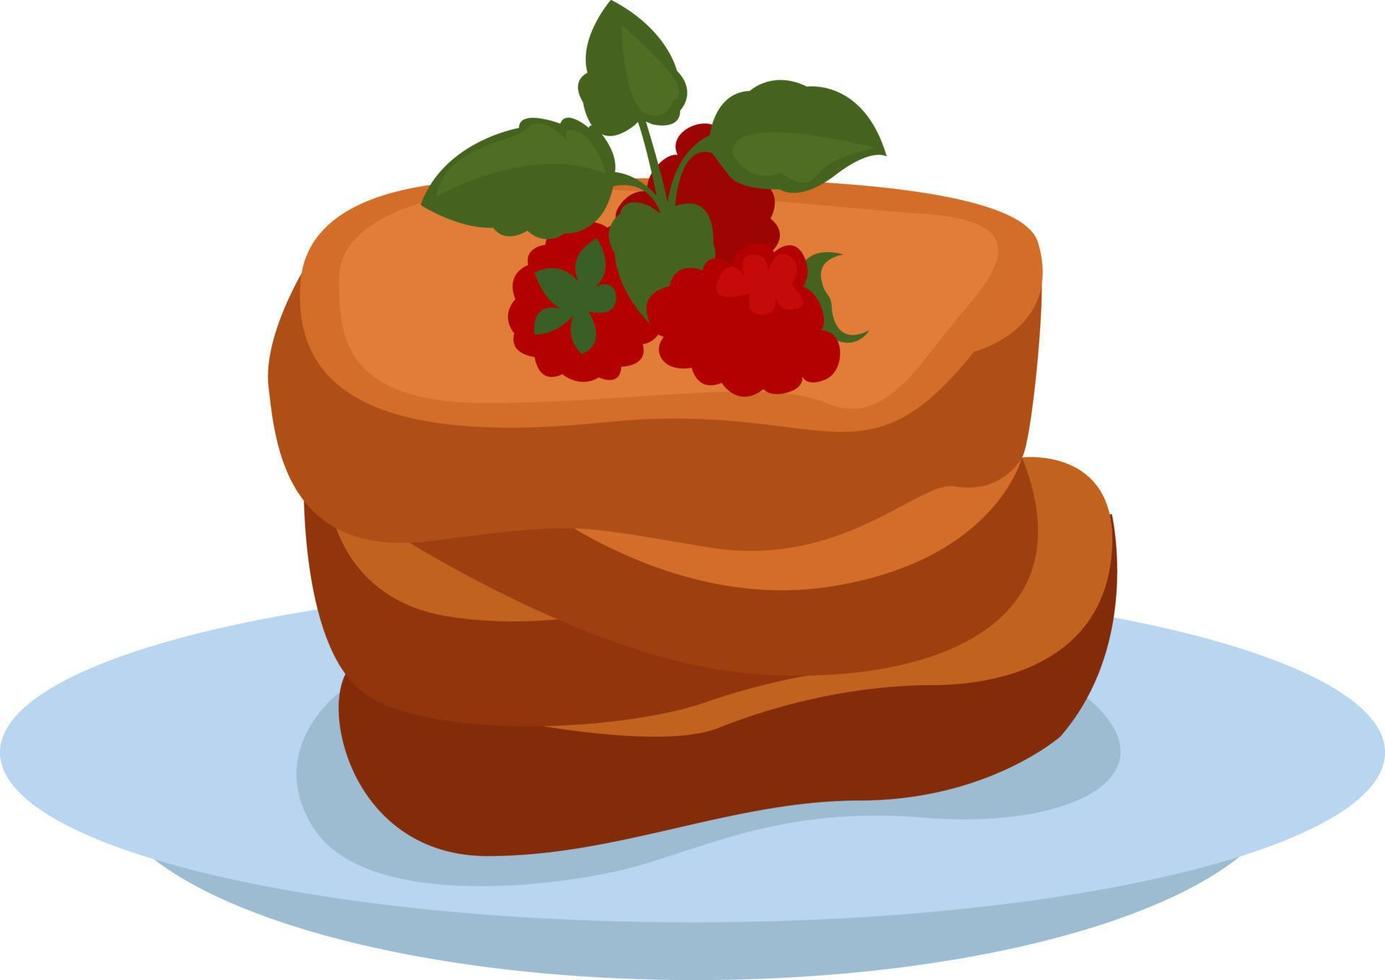 French toast, illustration, vector on white background